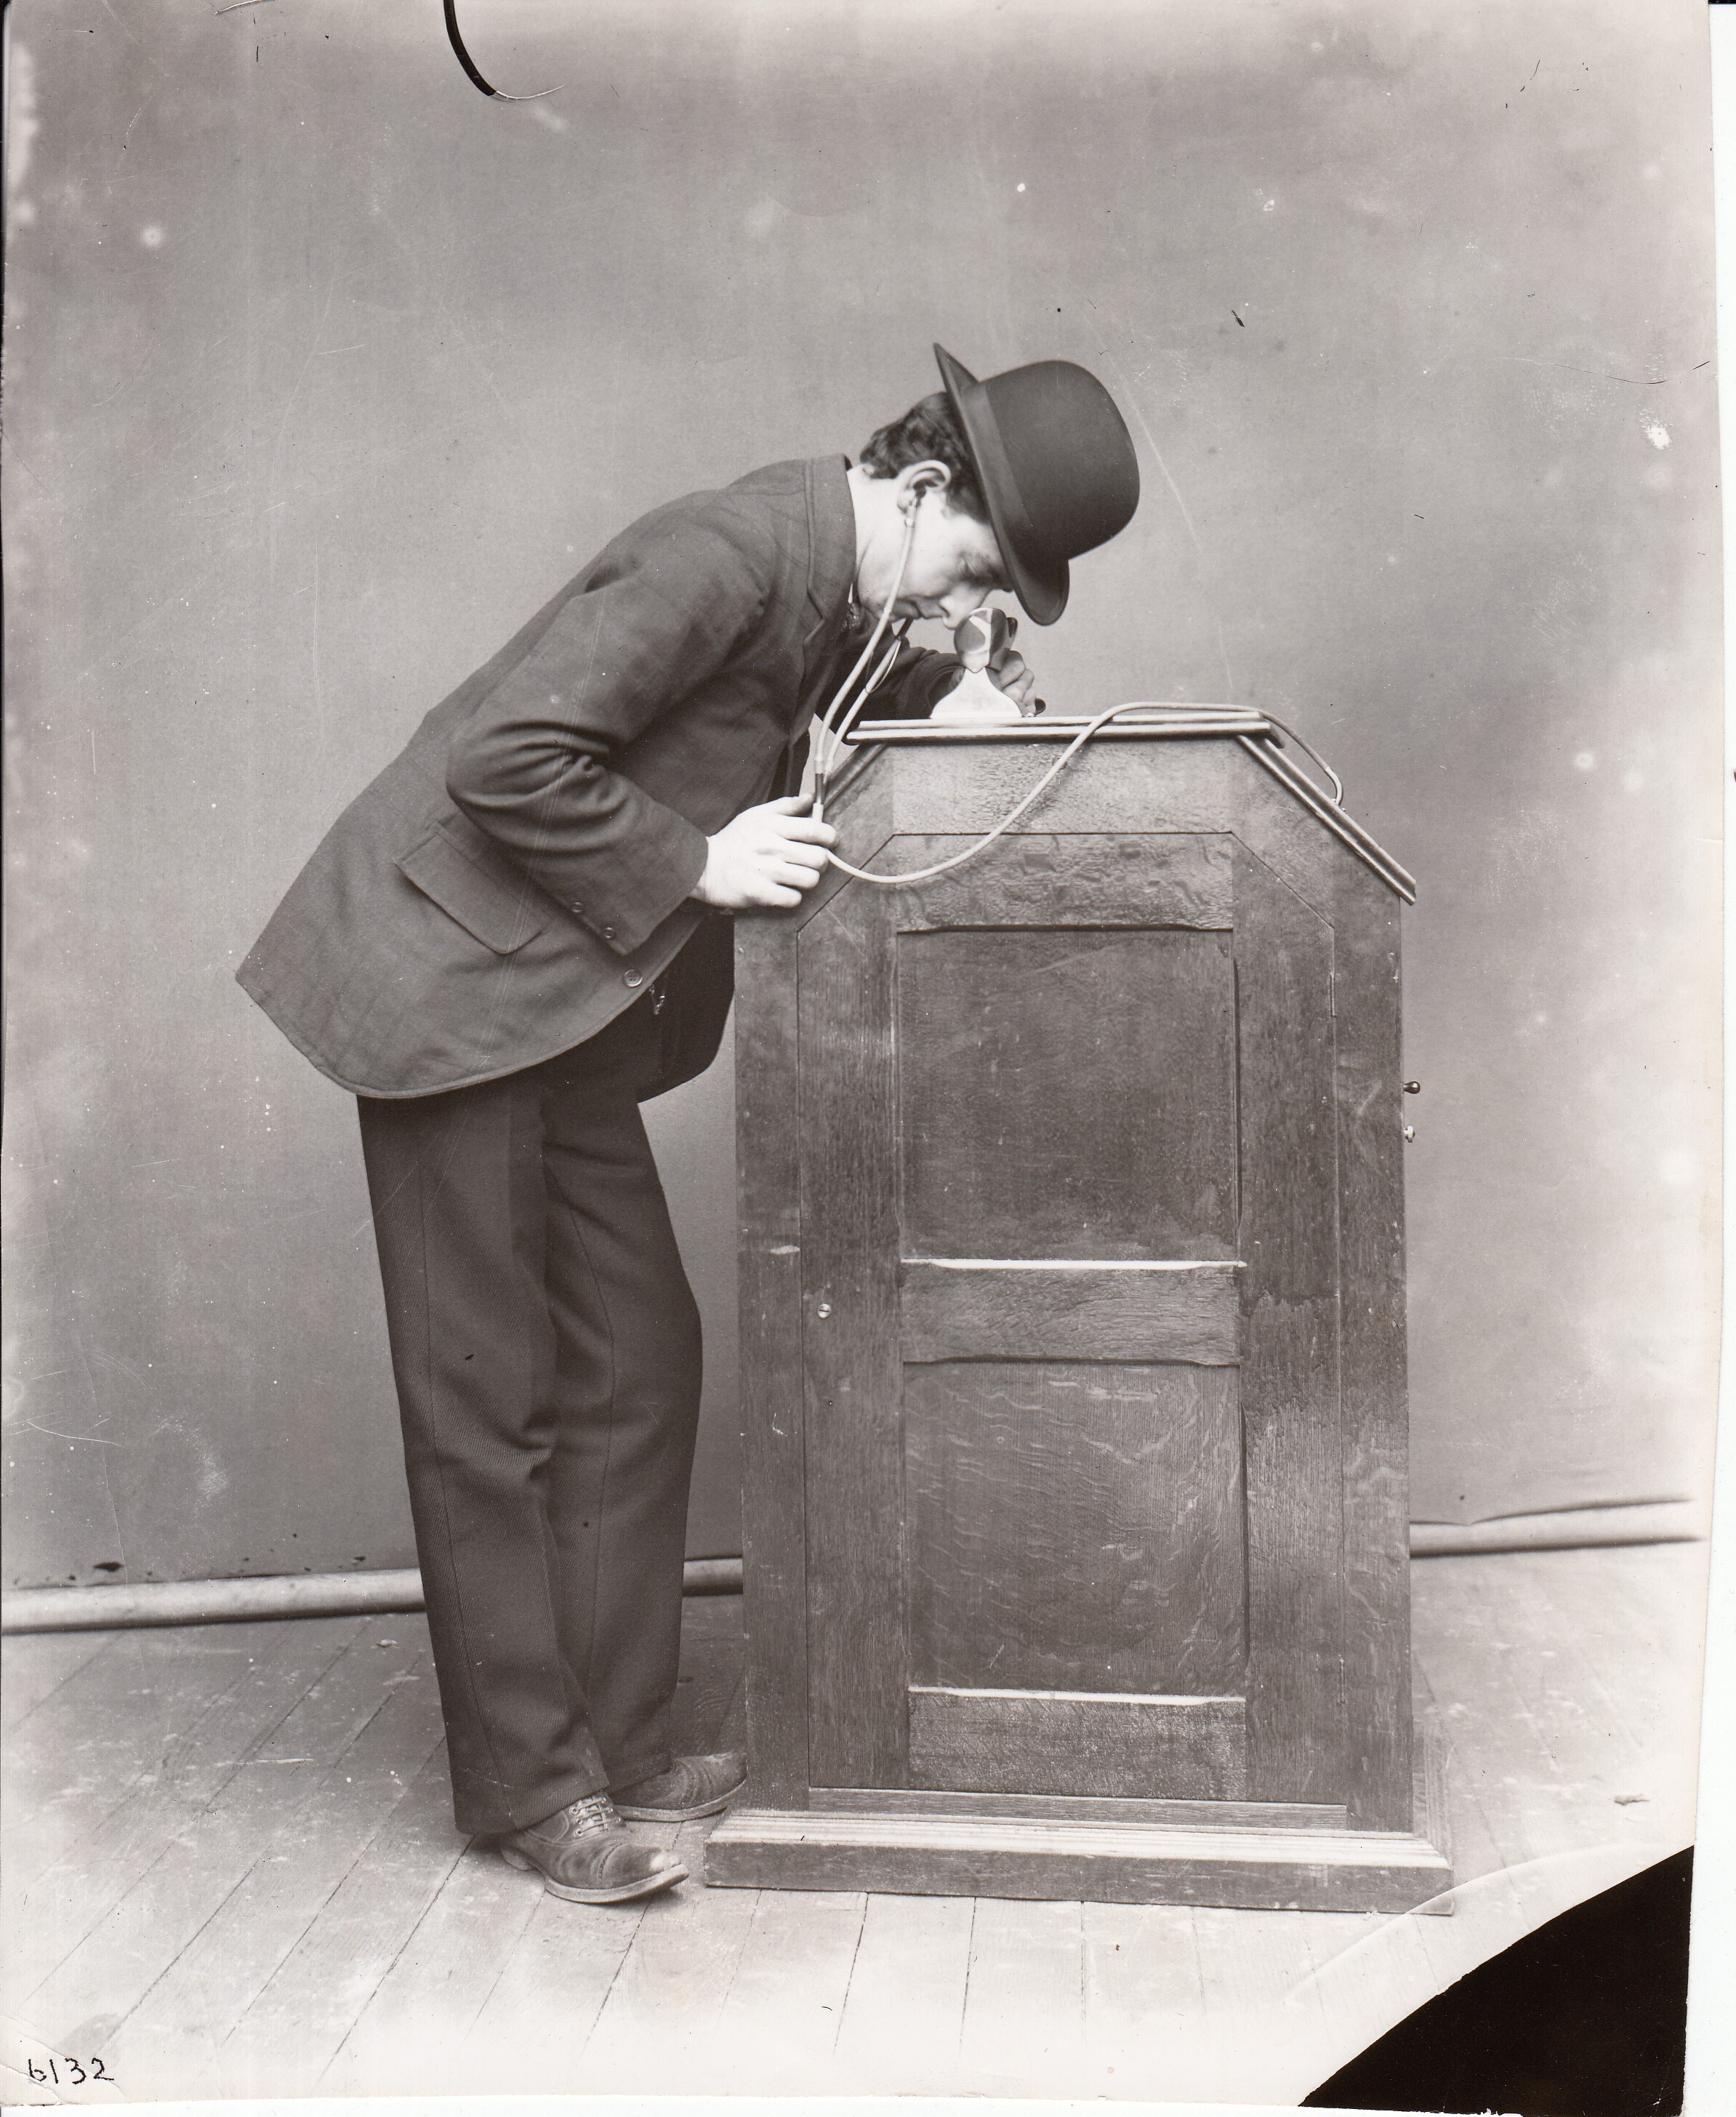 Man viewing a kinetoscope which is equipped with synchronized sound.